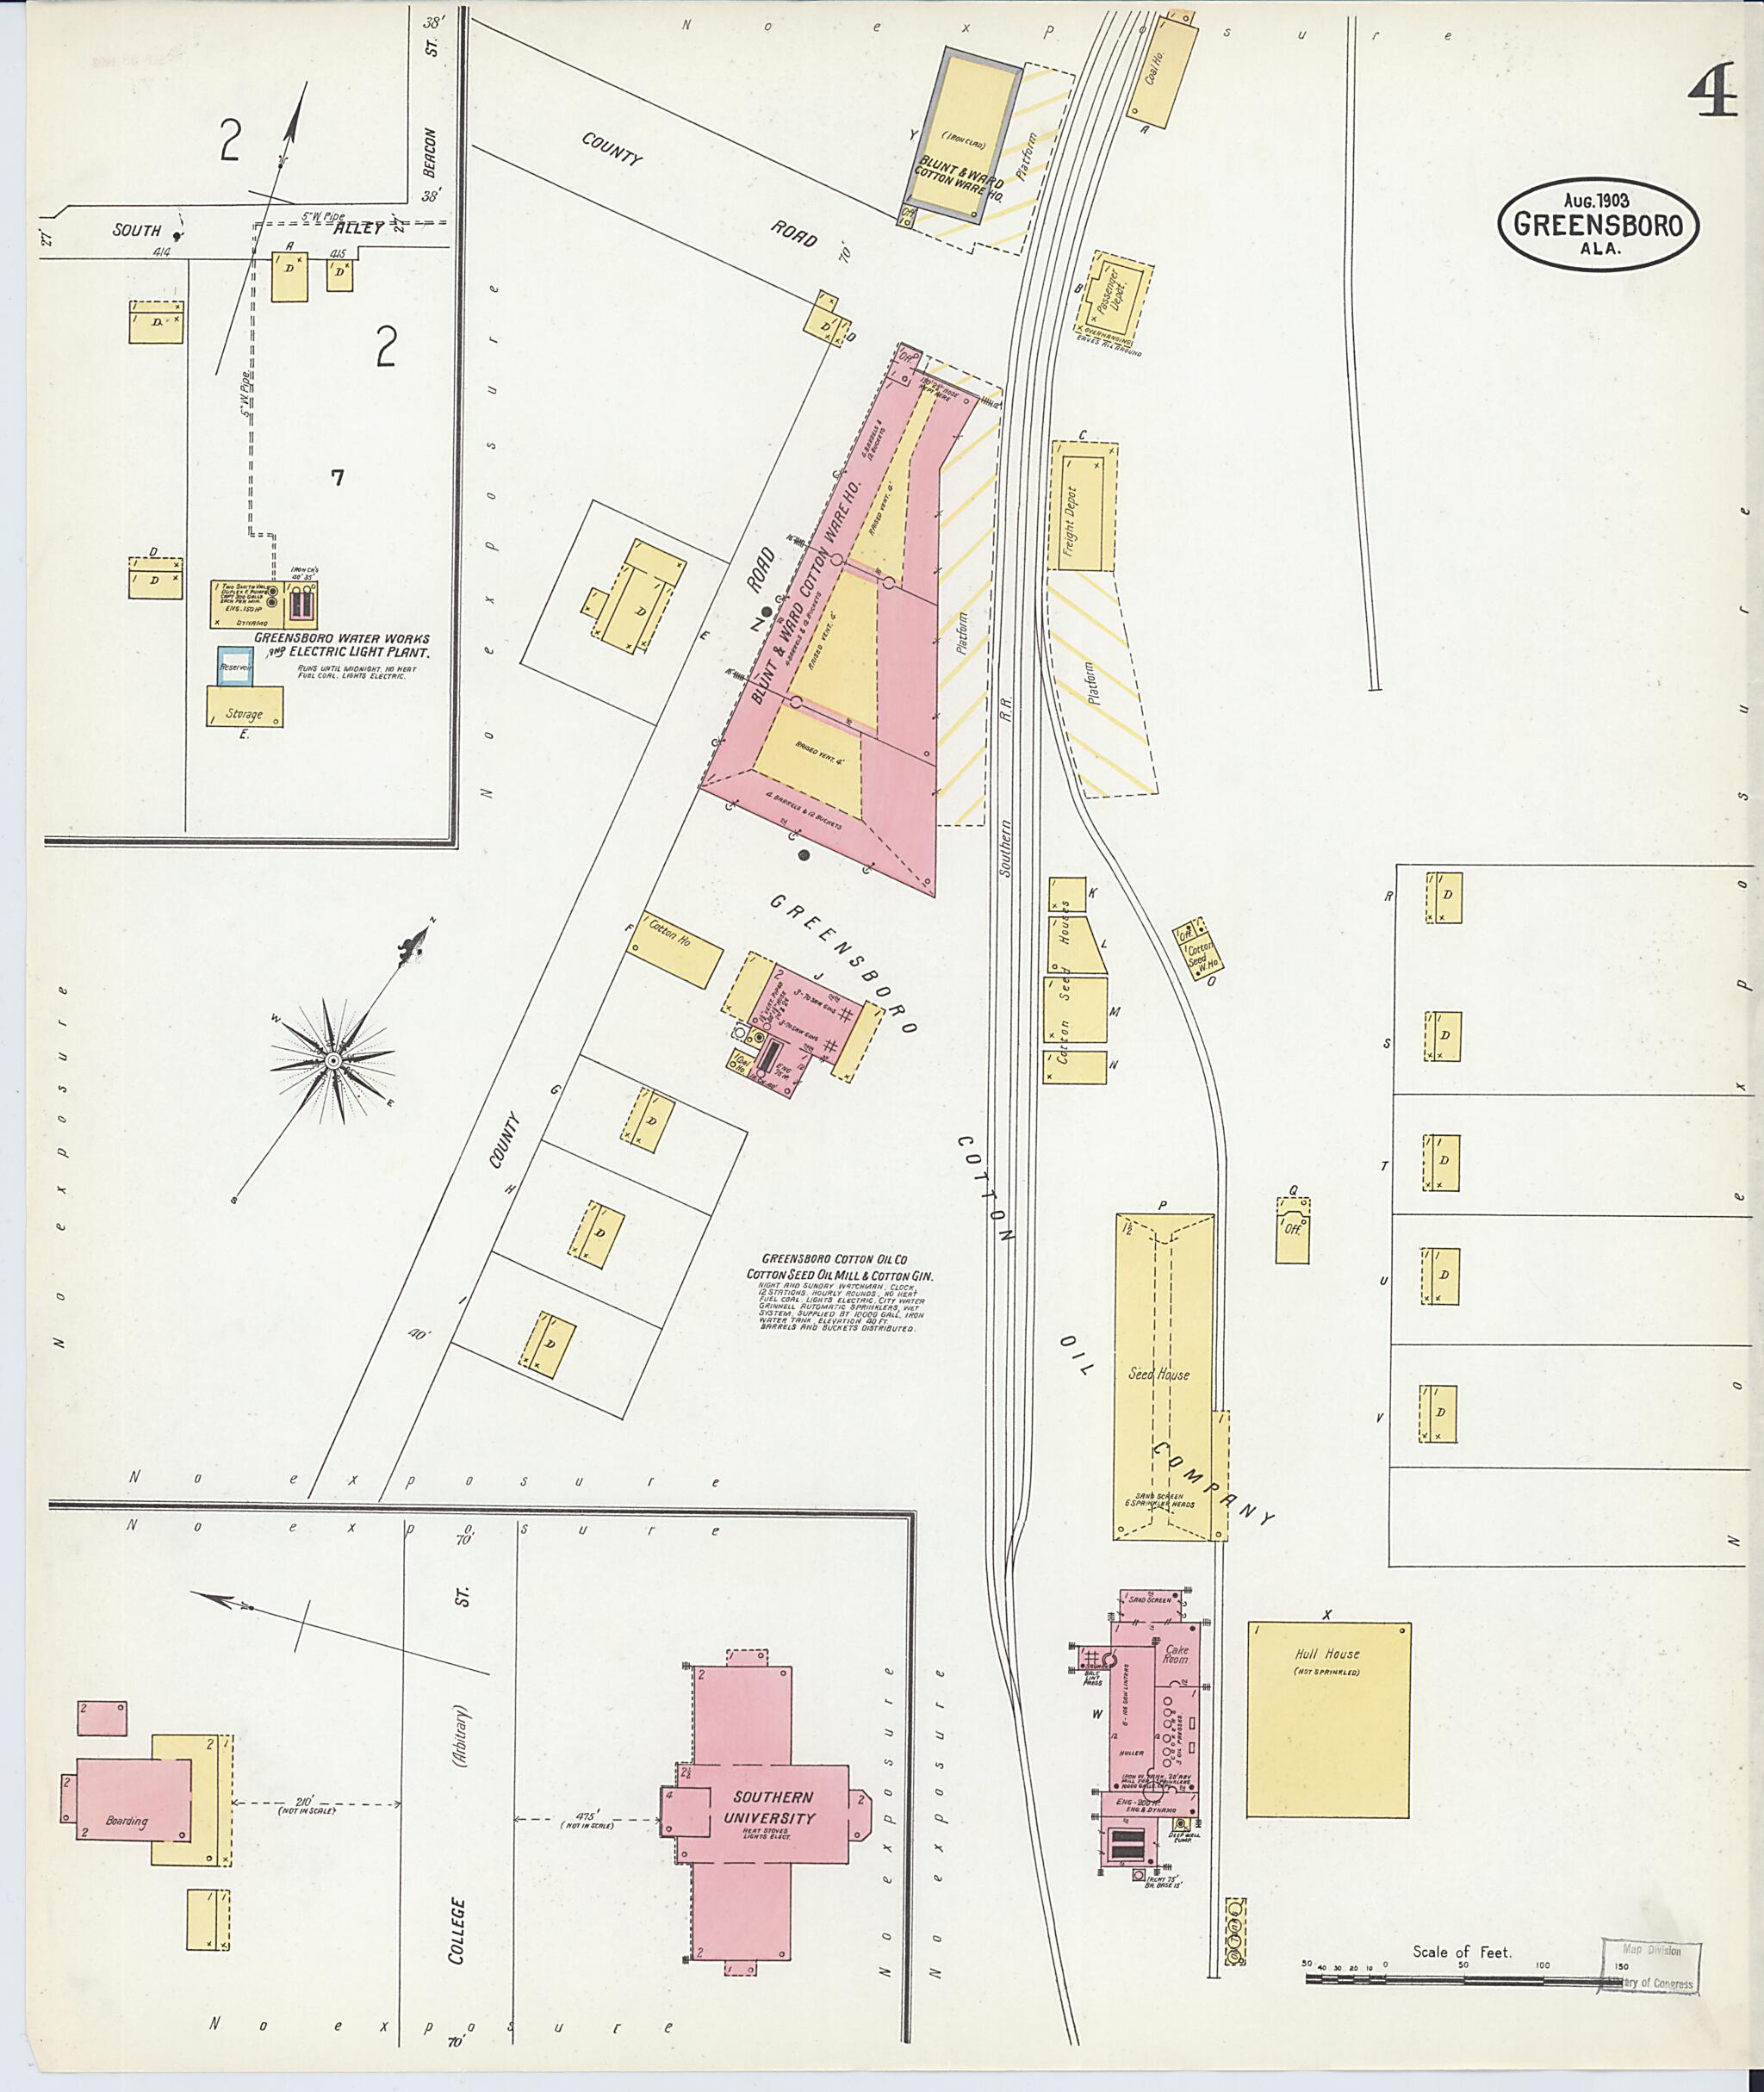 This old map of Greensboro, Hale County, Alabama was created by Sanborn Map Company in 1903